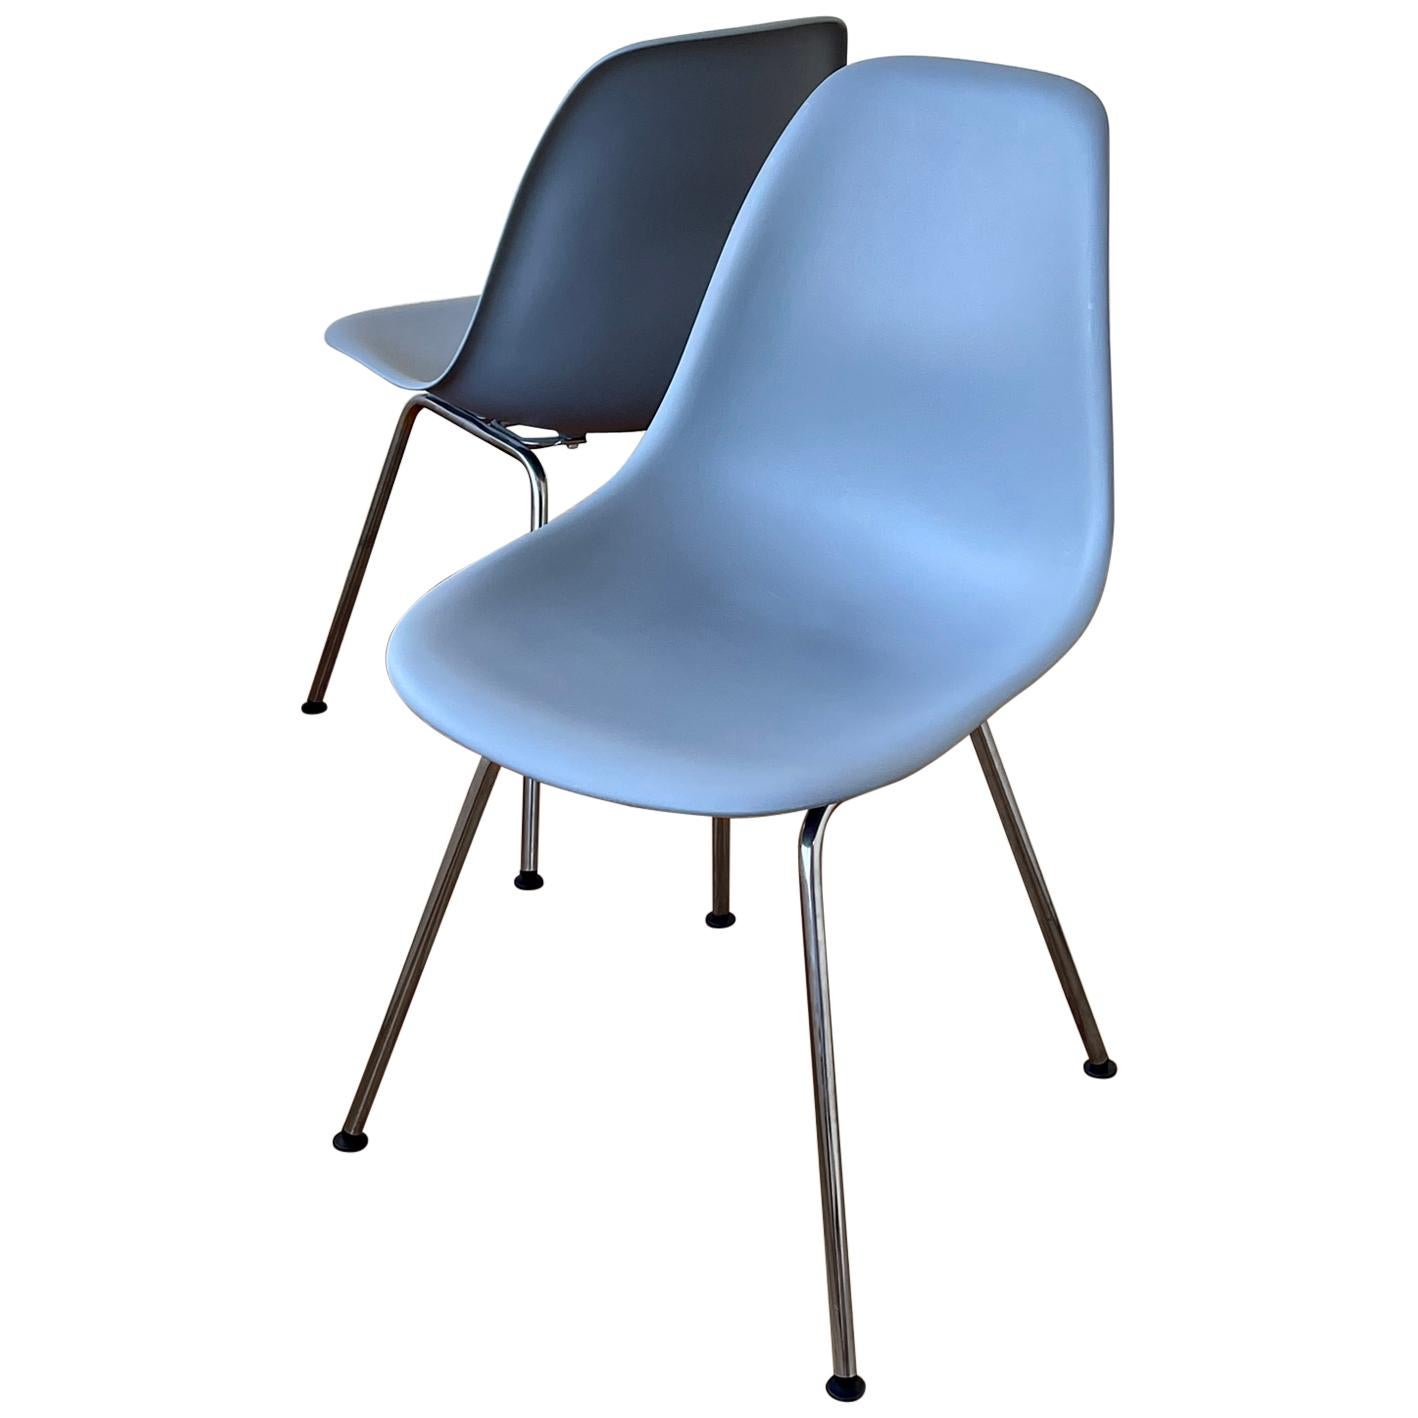 Iconic Pair of Molded Plastic Chairs Designed by Charles Eames for Herman Miller